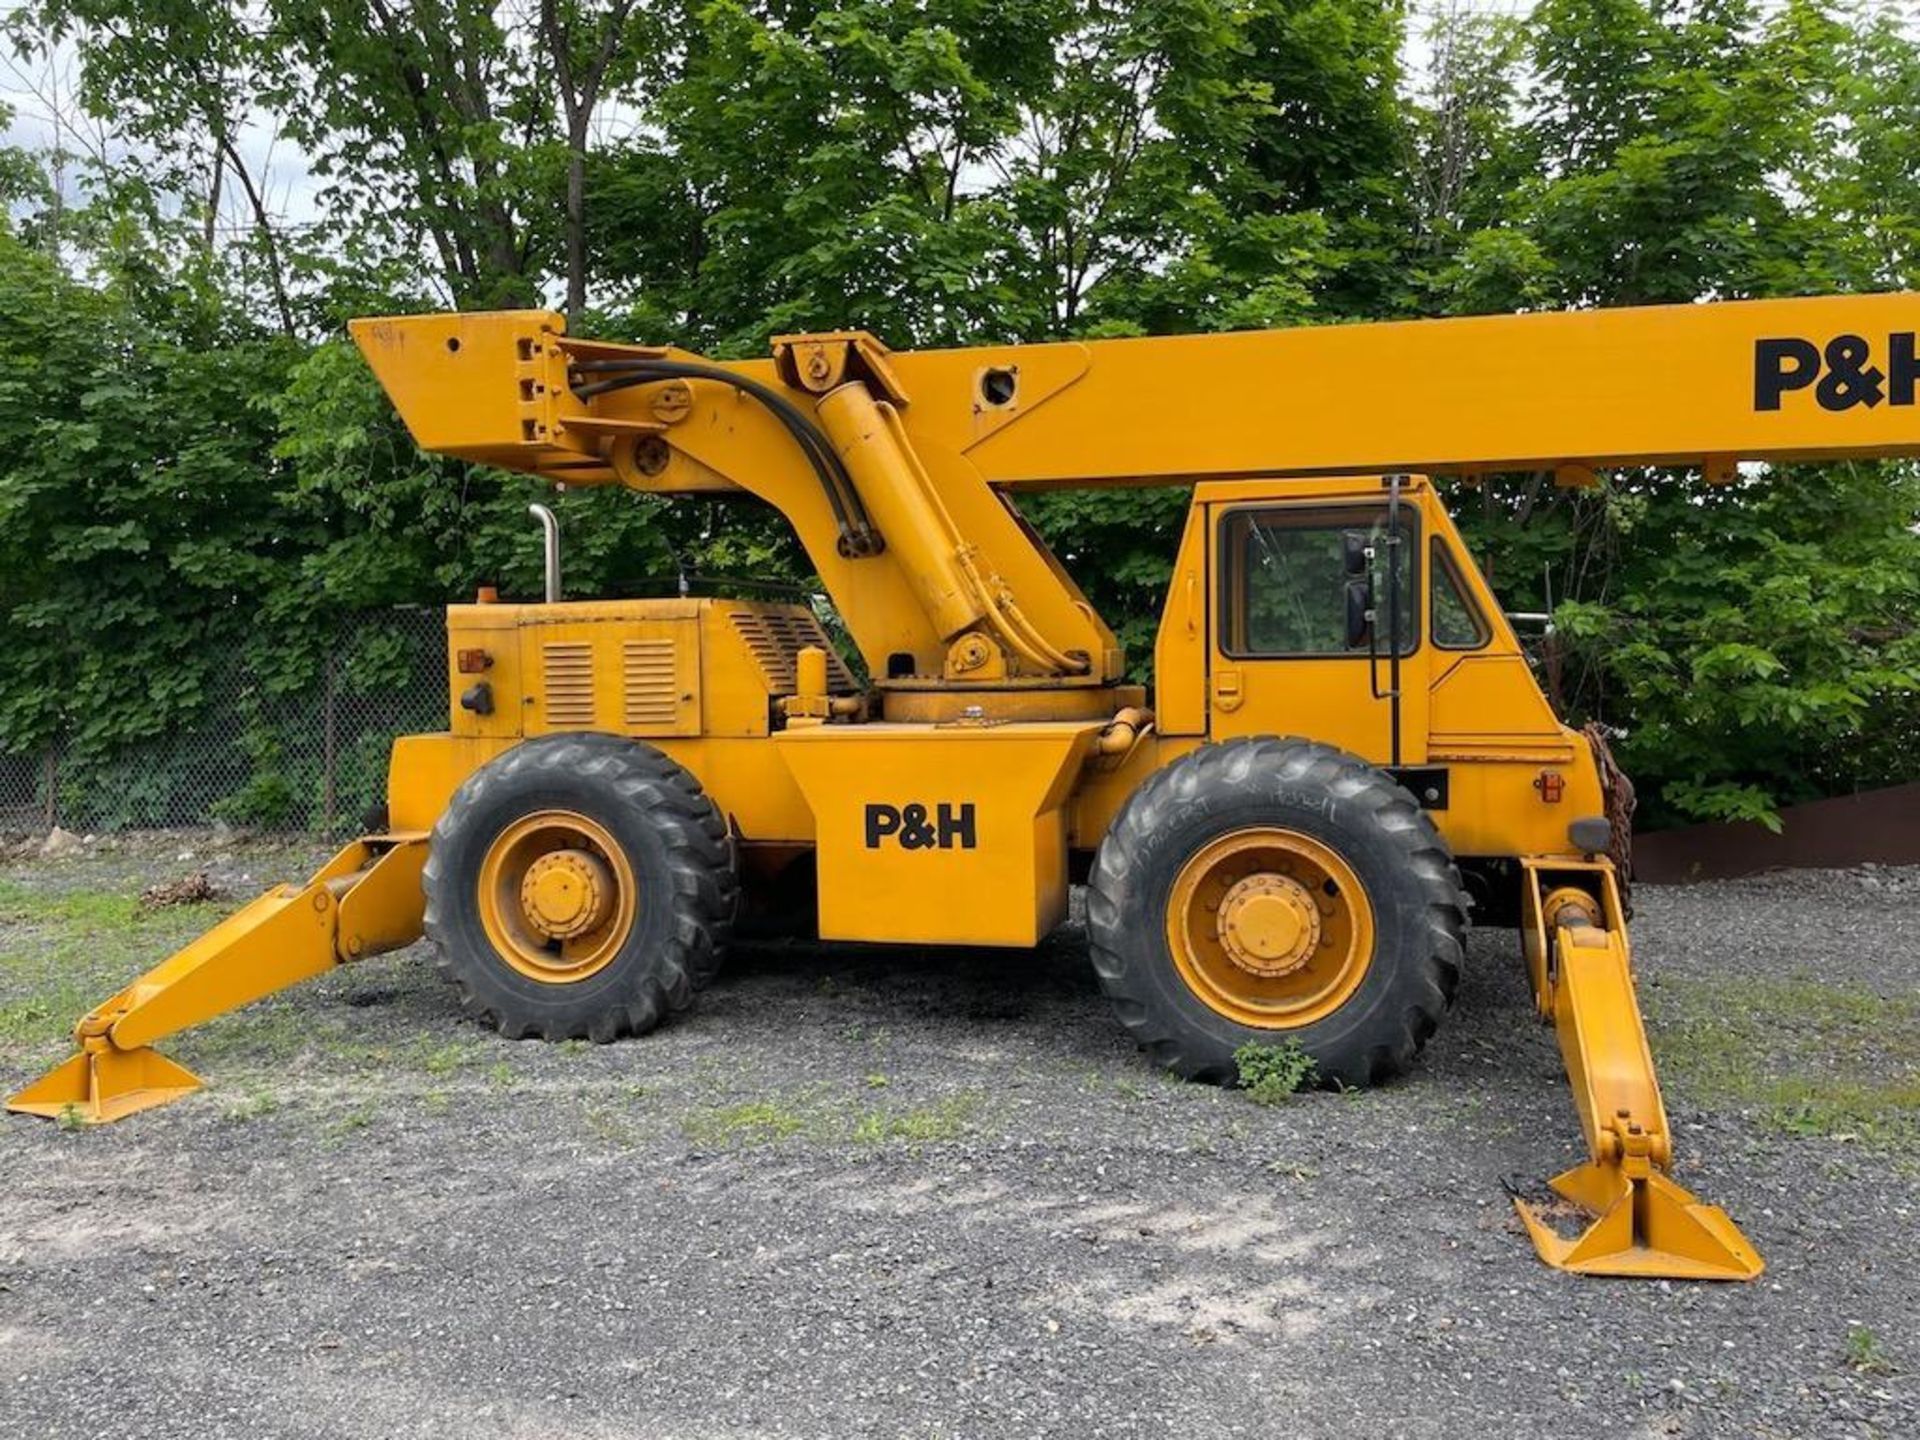 P&H MOBILE CRANE, MODEL R-200, 20 TON, HYDRAULIC, 28'10" - 64'10" BOOM, OUTRIGGERS, SN 29086 CLIENT